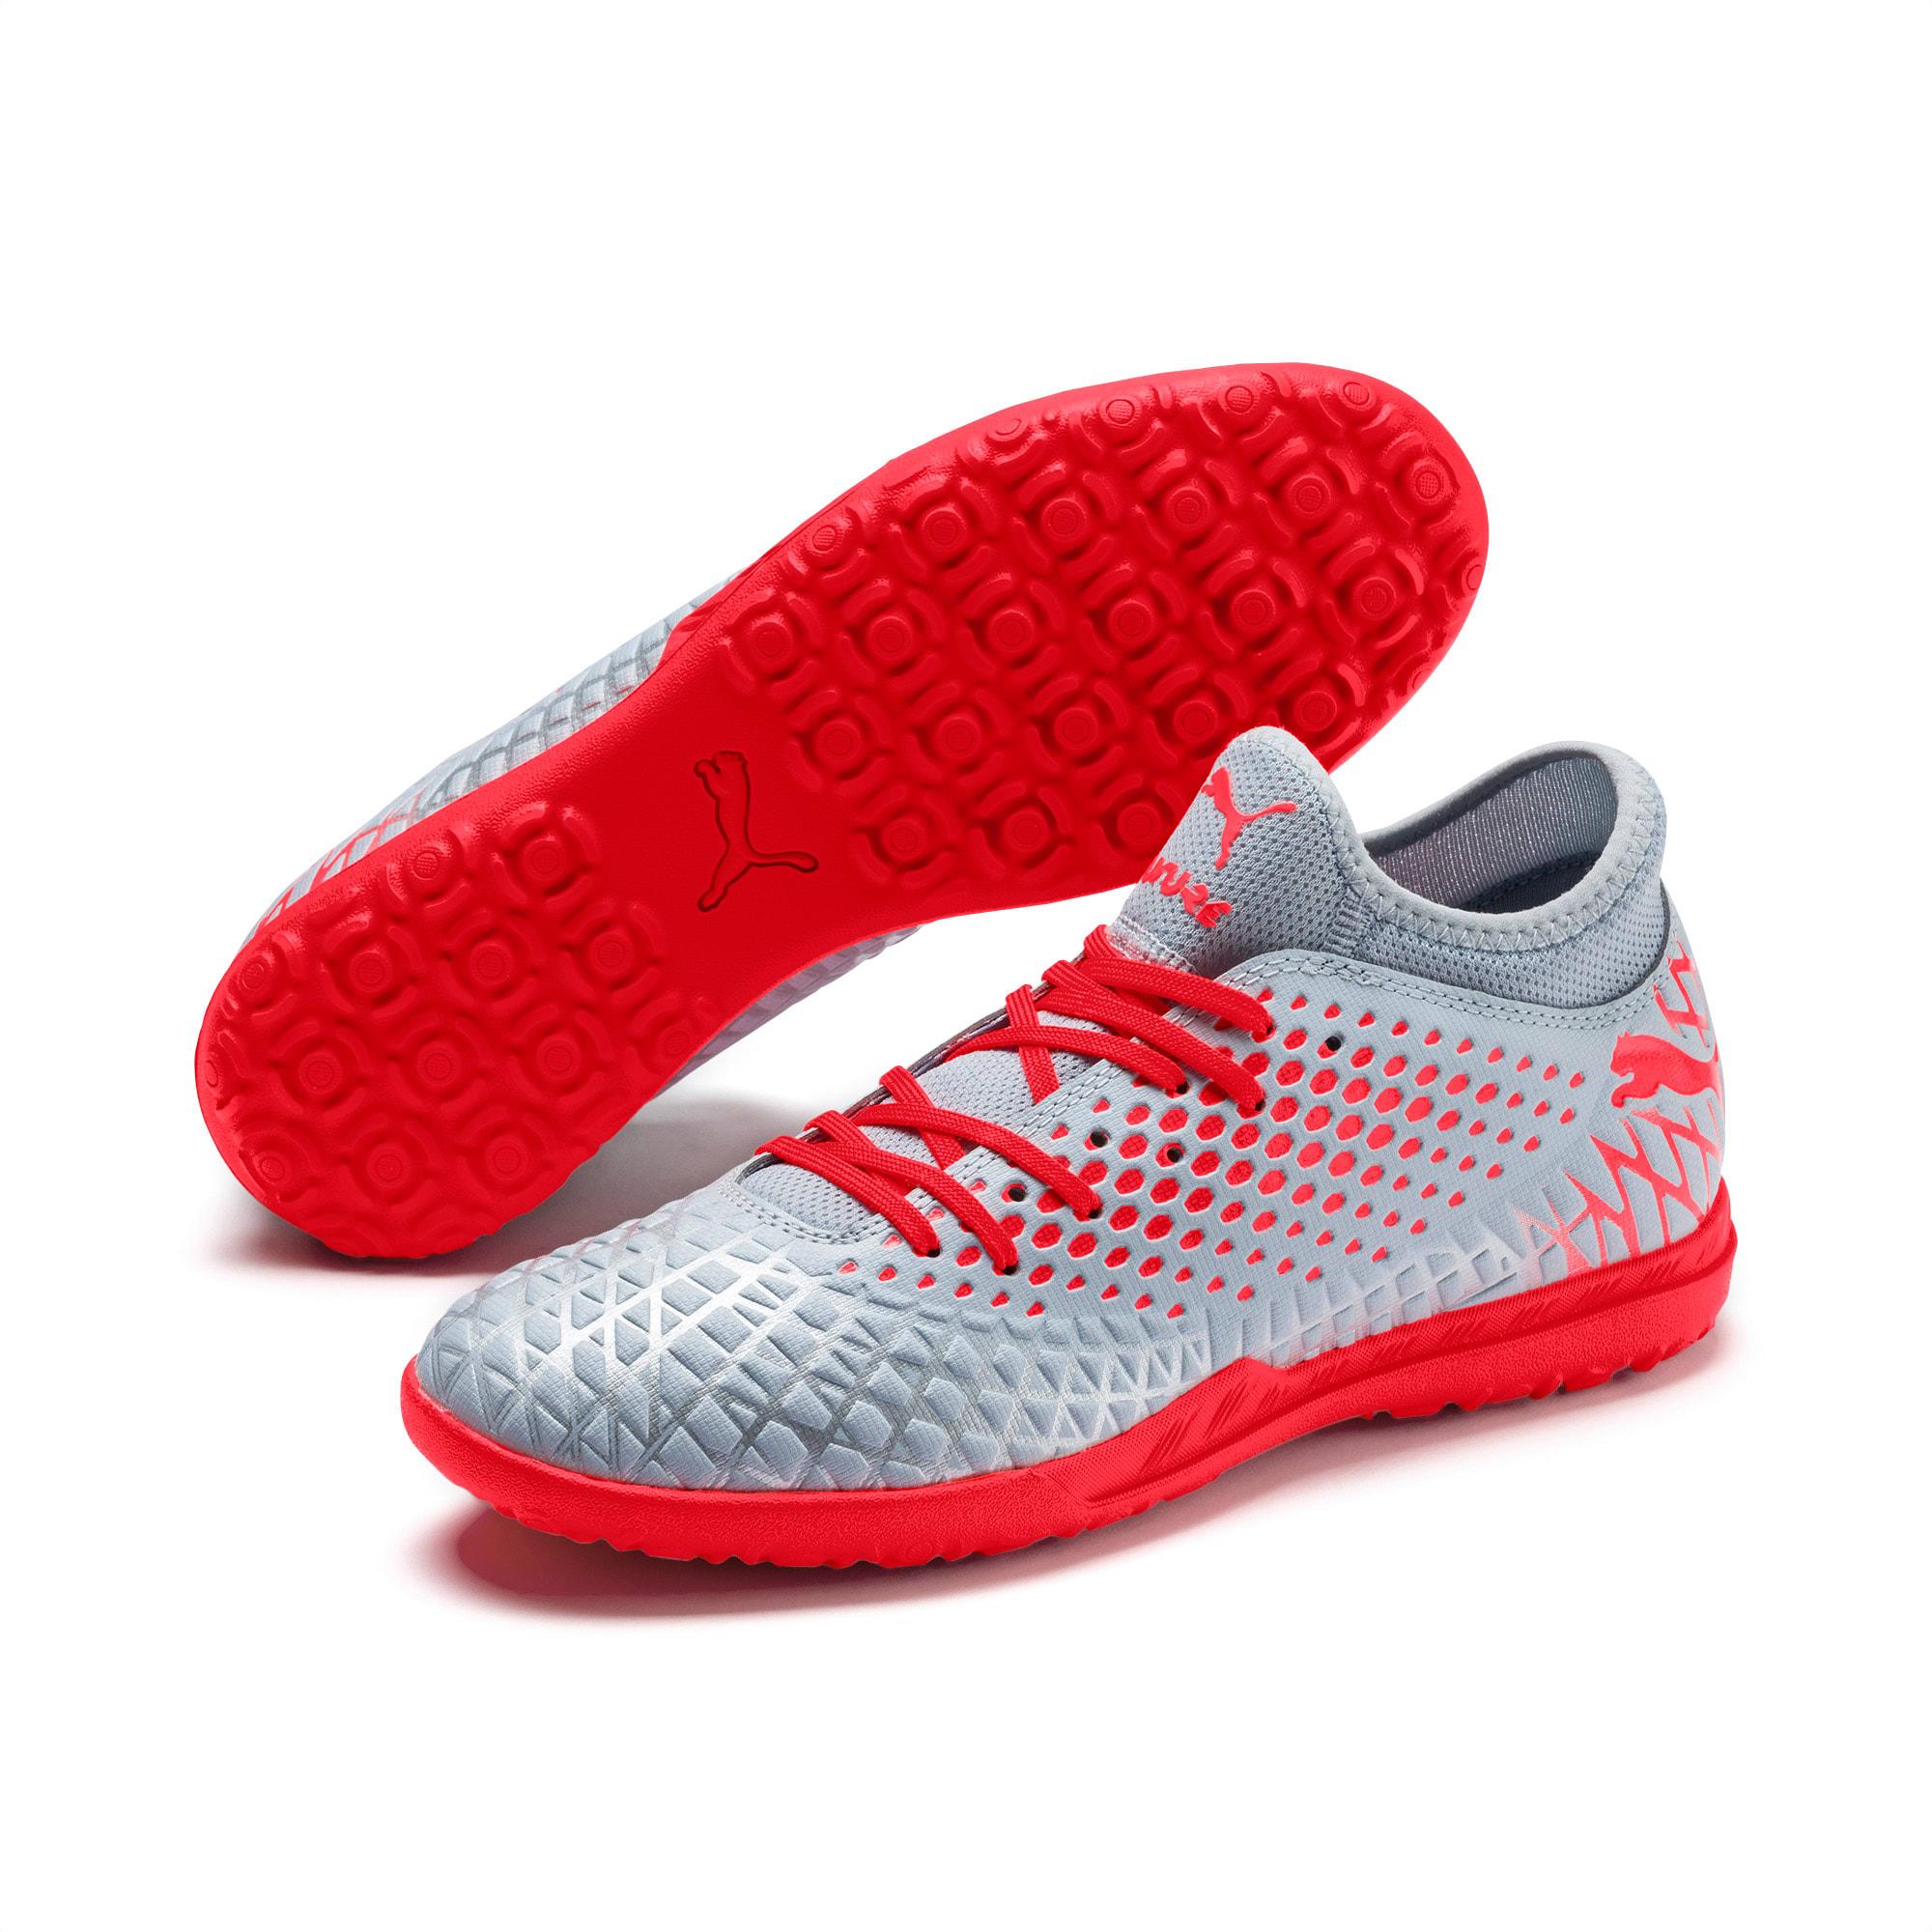 PUMA Synthetic Future 4.3 Netfit It Men's Soccer Shoes in 01 (Red) for ...